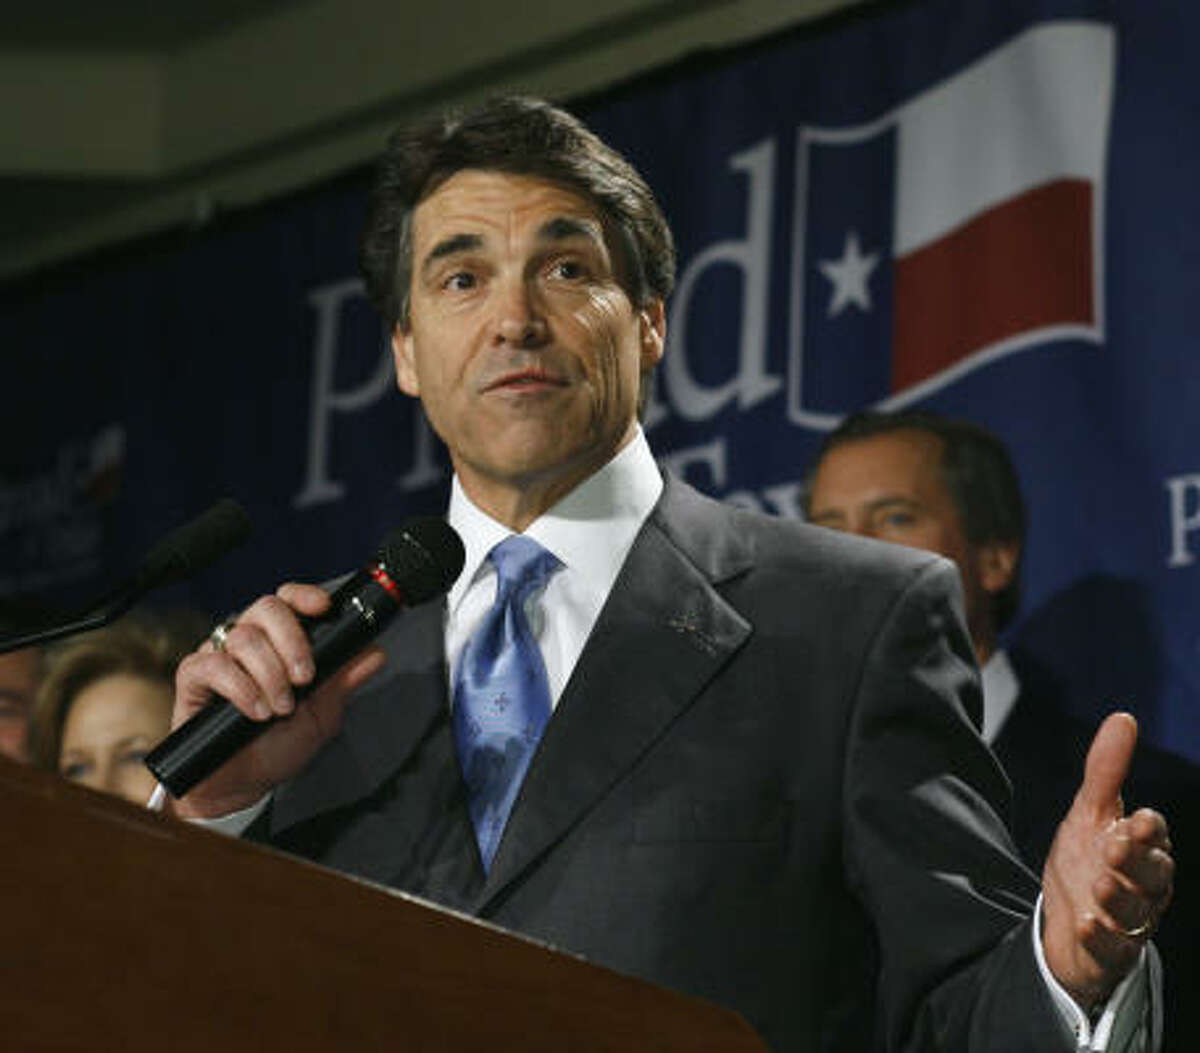 Republican Texas Gov. Rick Perry was re-elected with less than 40 percent of the vote against four opponents, far from a mandate.